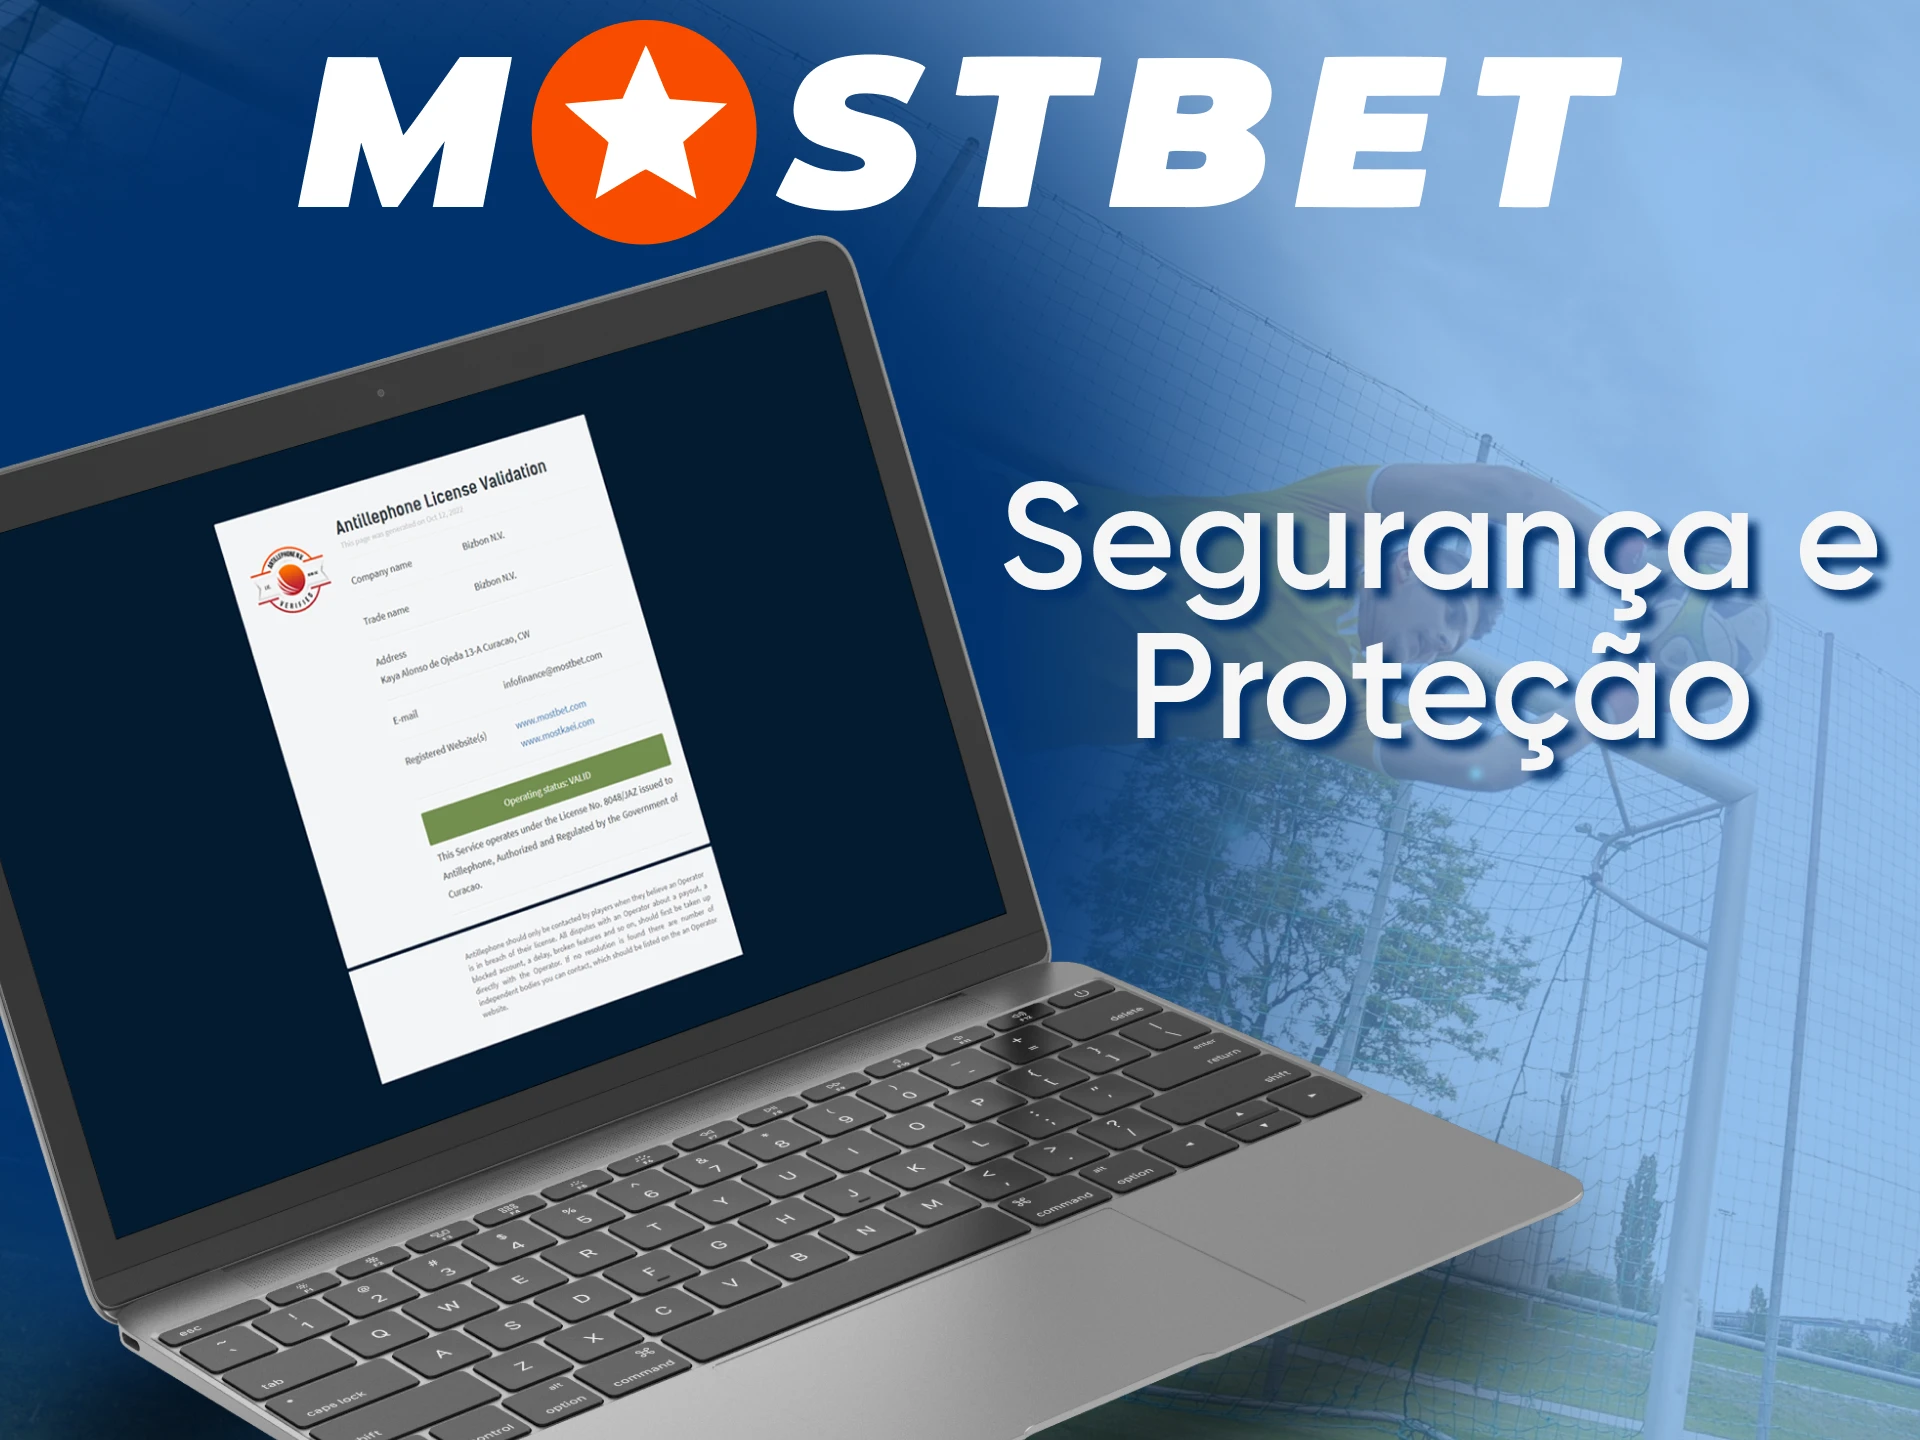 Mostbet's official website is completely legal and safe to use.